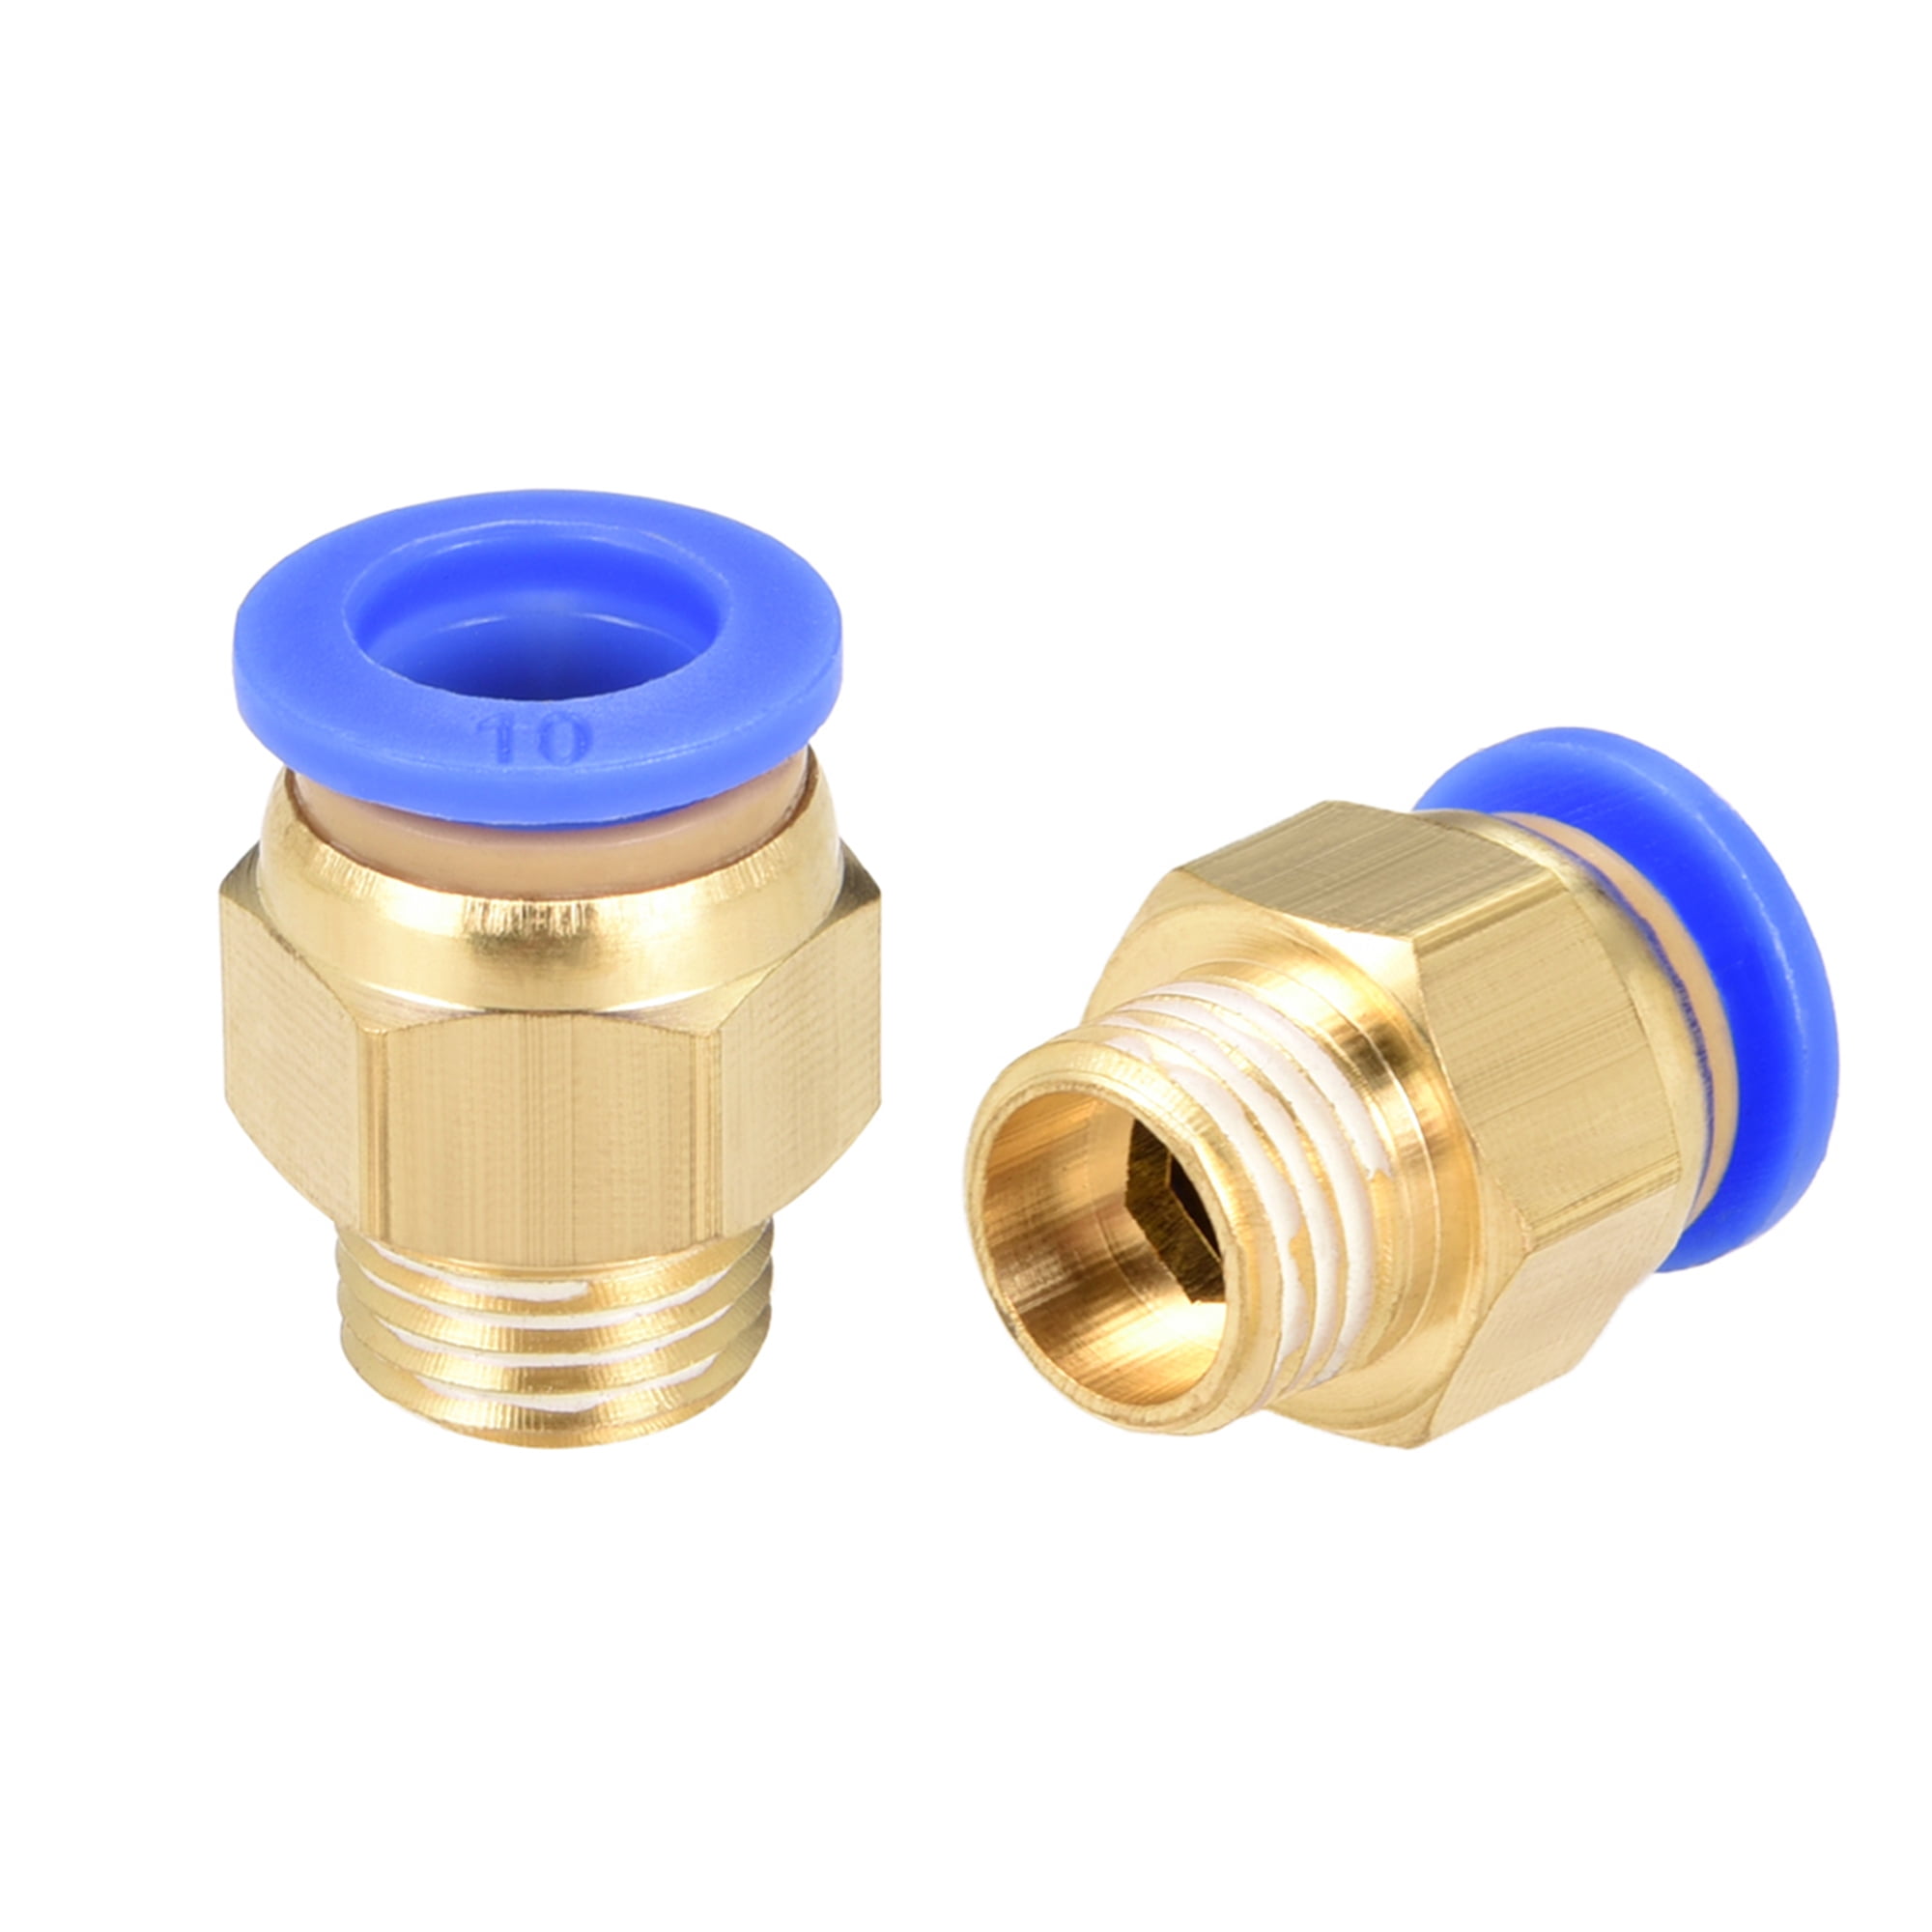 Qjaiune 5Pcs Male Straight Push to Connect Fittings 12mm Tube OD x 1/4 inch NPT Thread Air Push Connect Tool Pneumatic Hose Fittings 